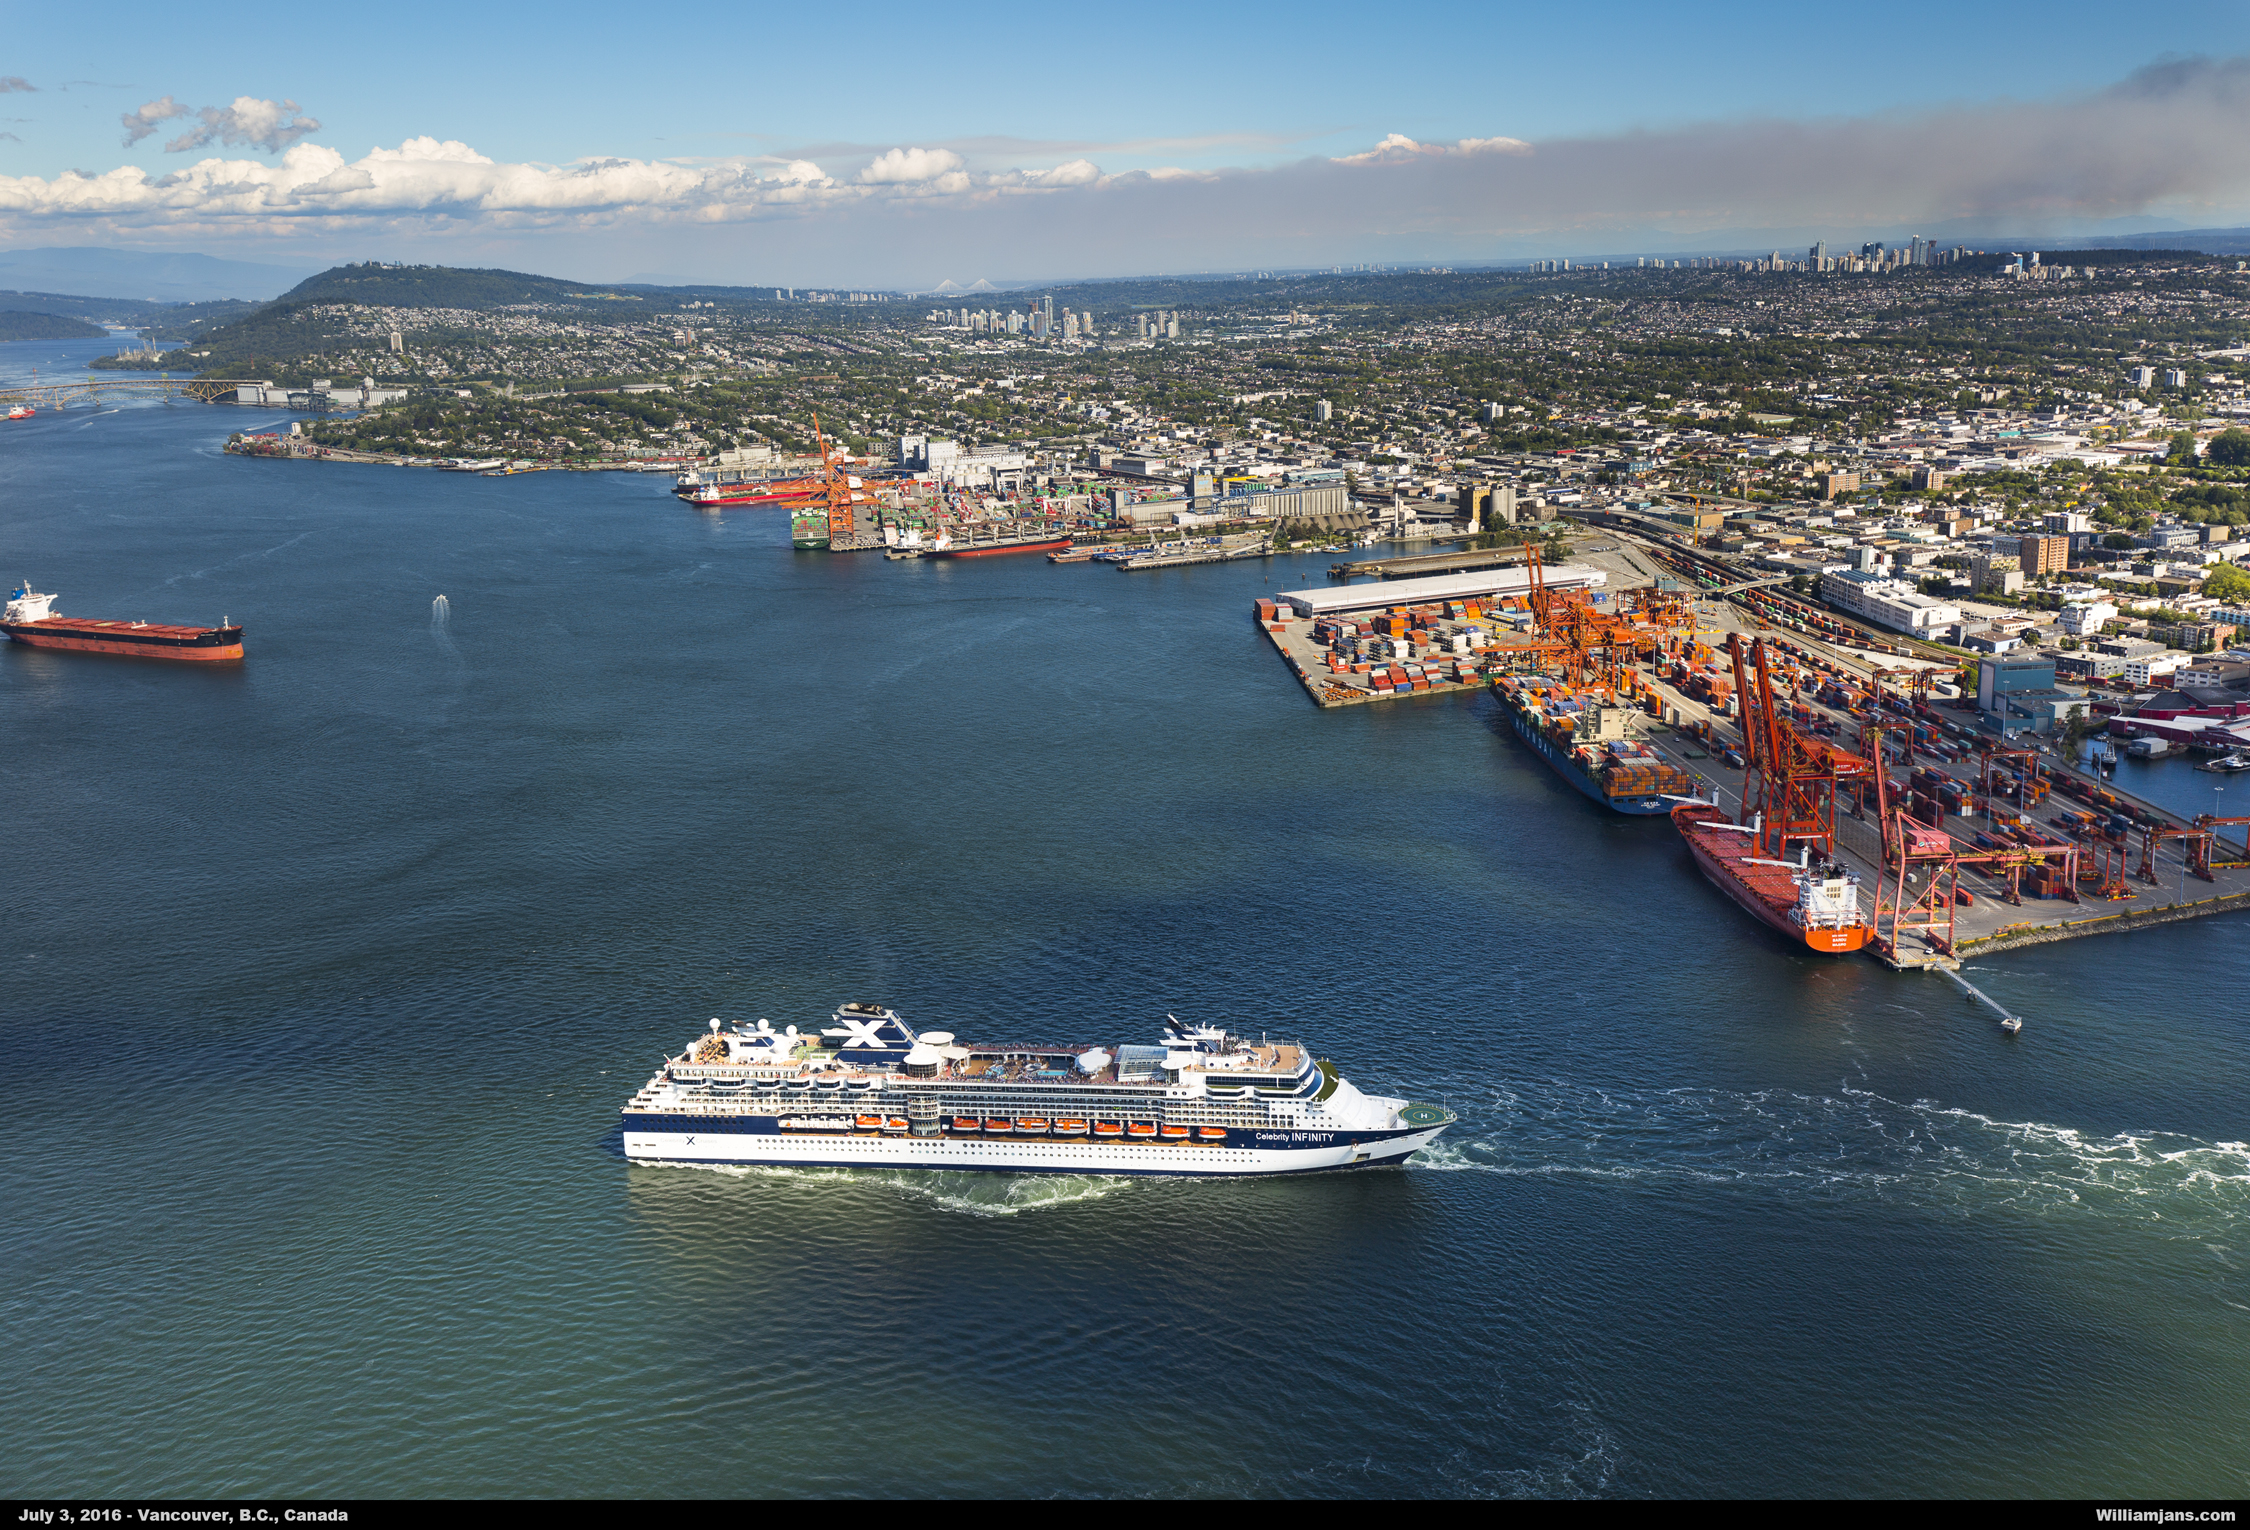 The Port of Vancouver